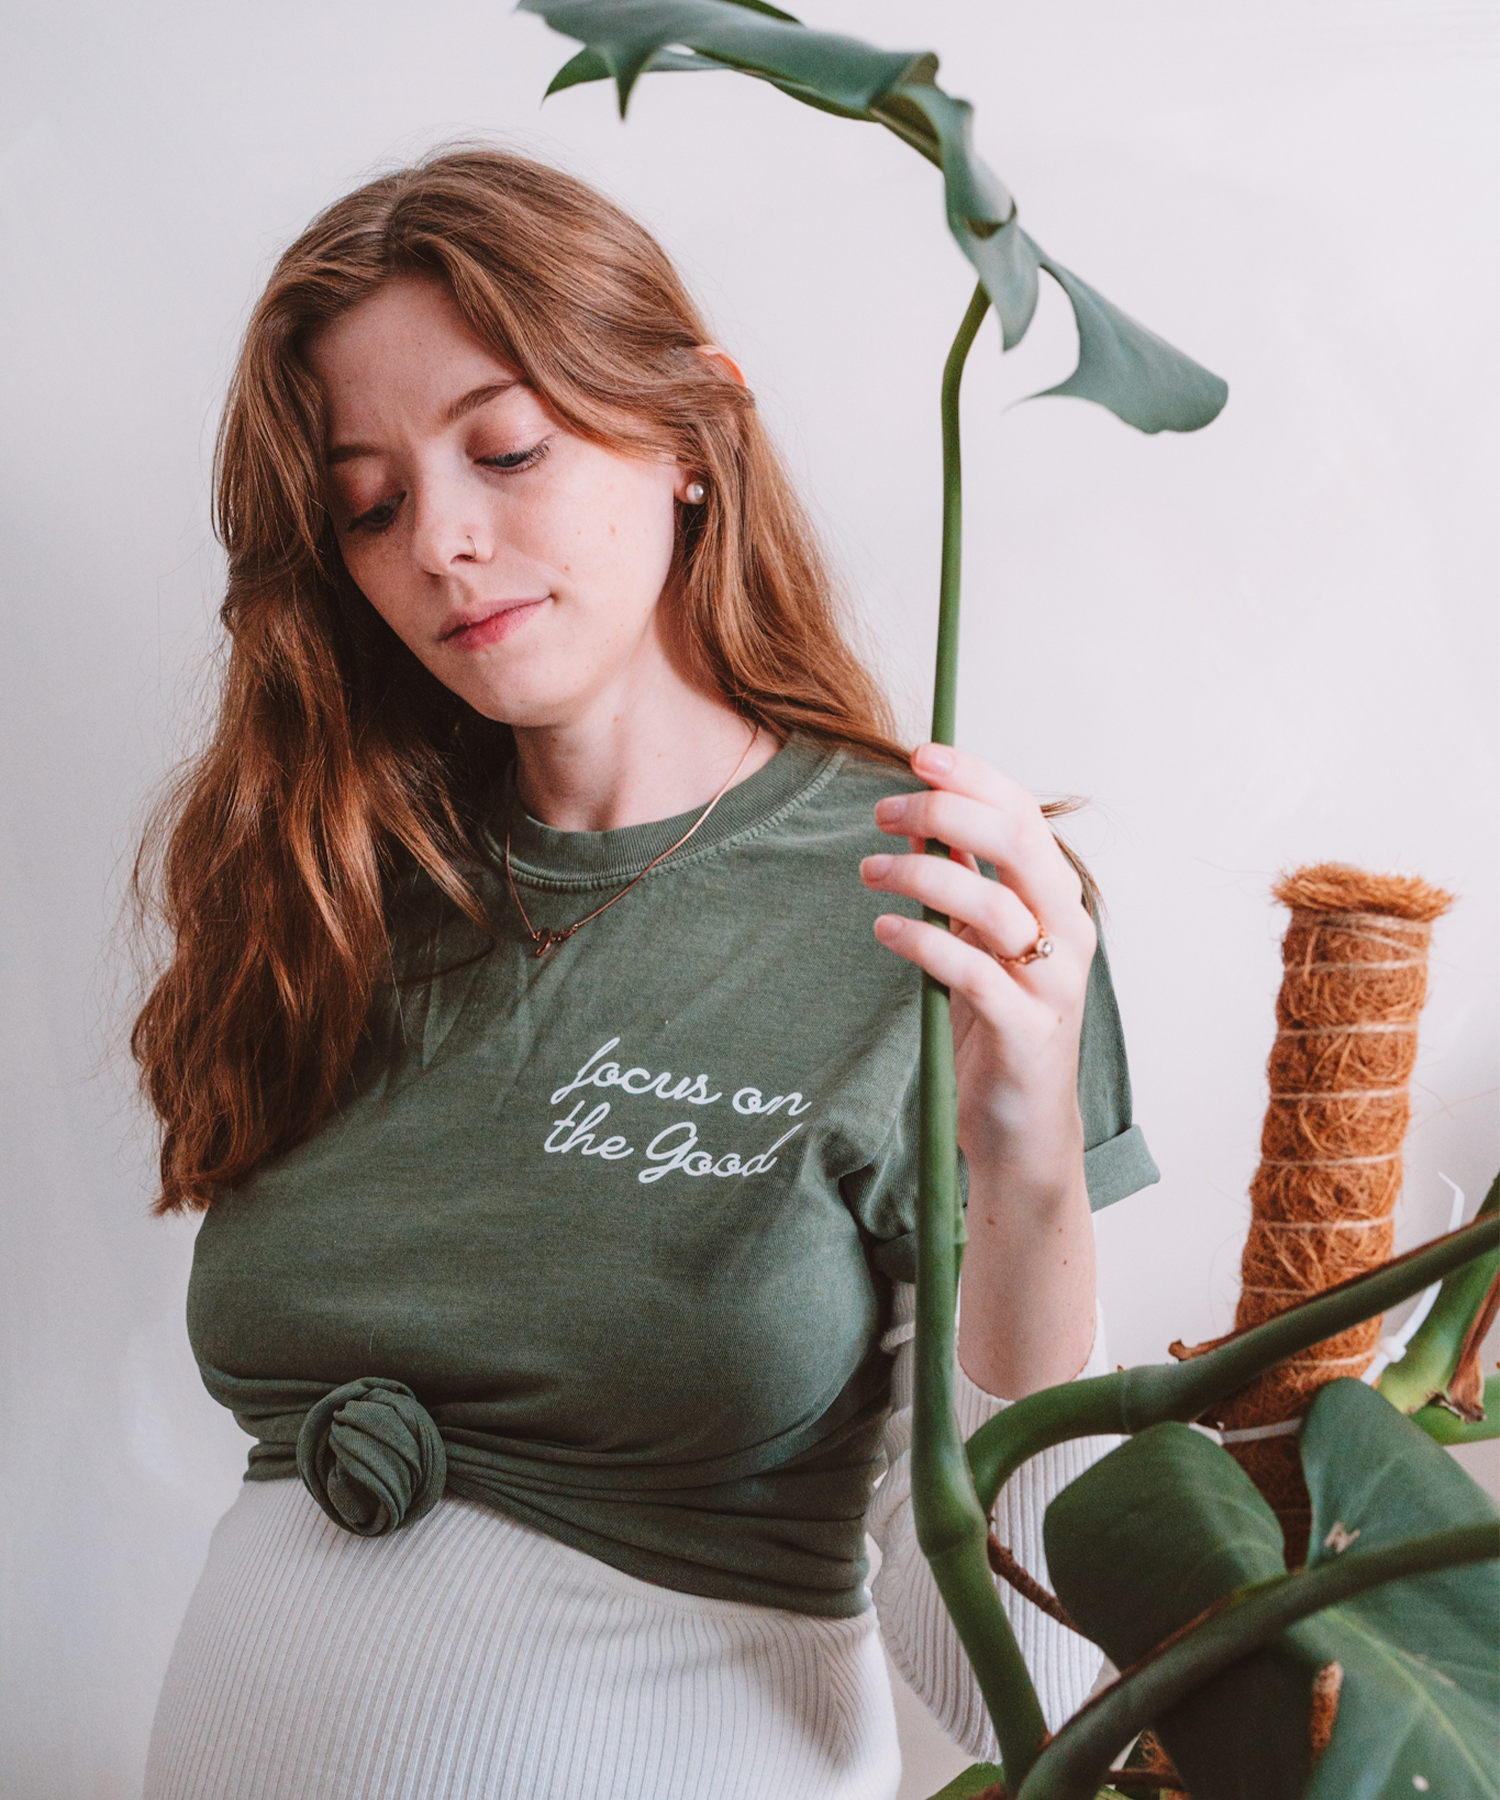 A model is posed holding a monstera leaf and looking down at her "Focus on the Good" t-shirt in moss